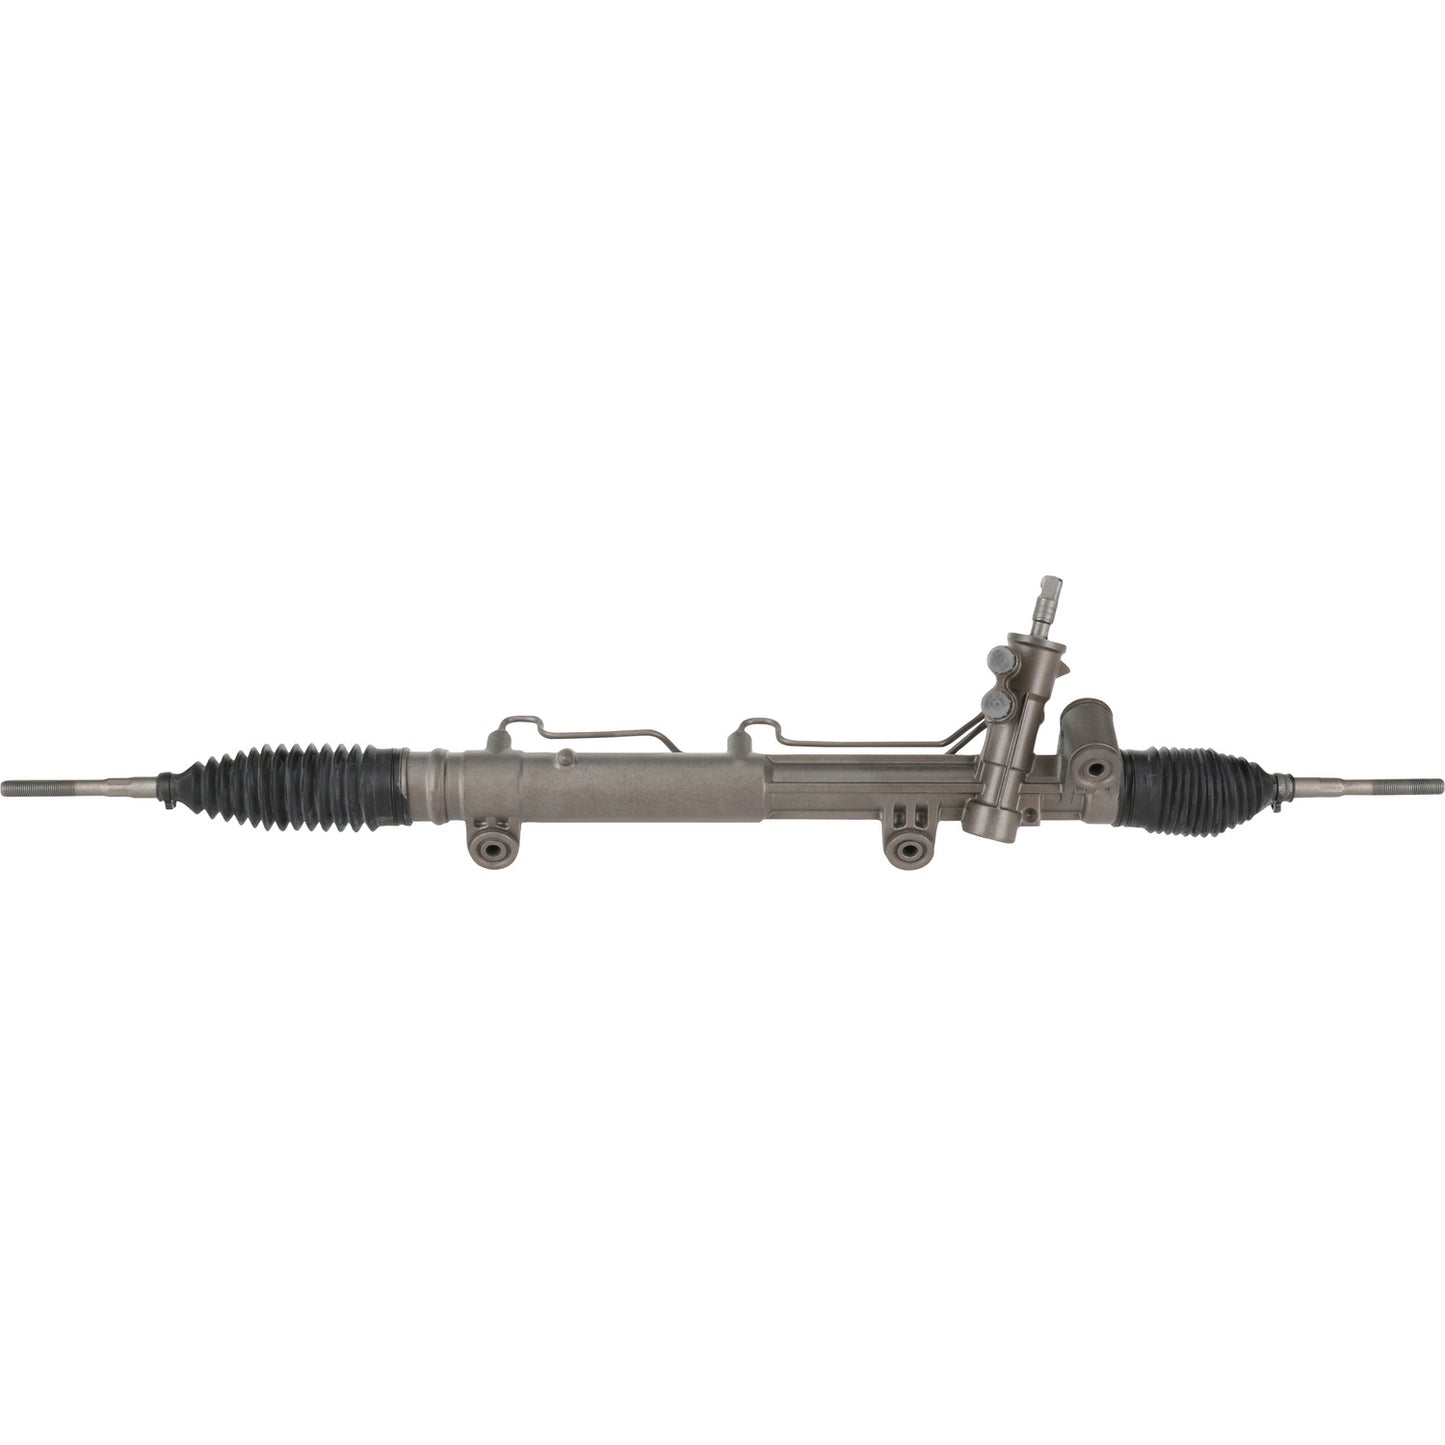 Rack and Pinion Assembly - MAVAL - Hydraulic Power - Remanufactured - 95356M